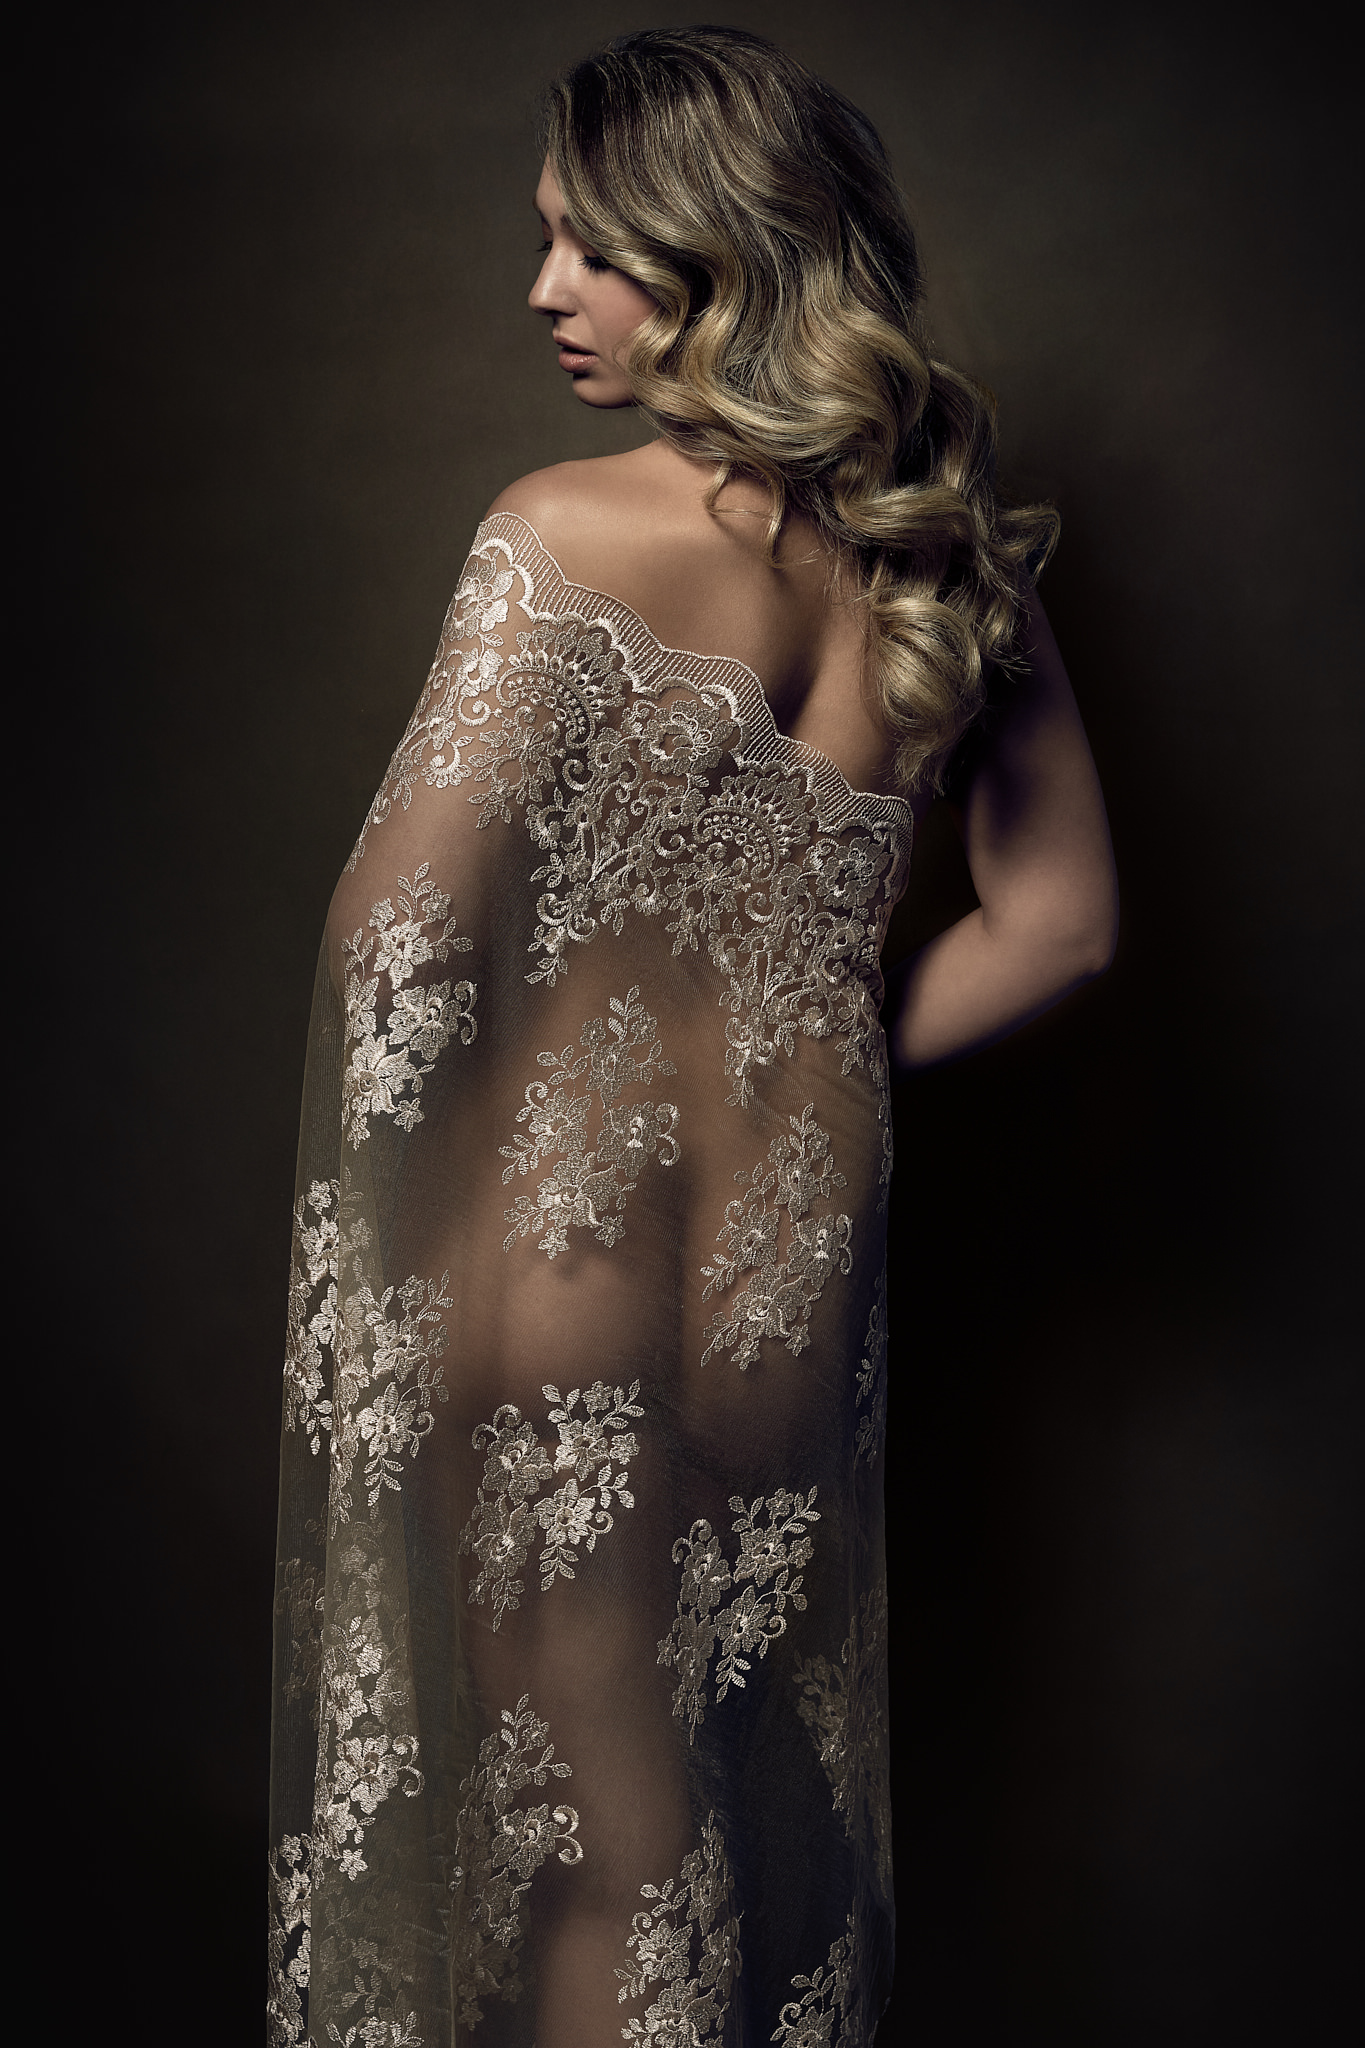 Boudoir portrait styled with lace